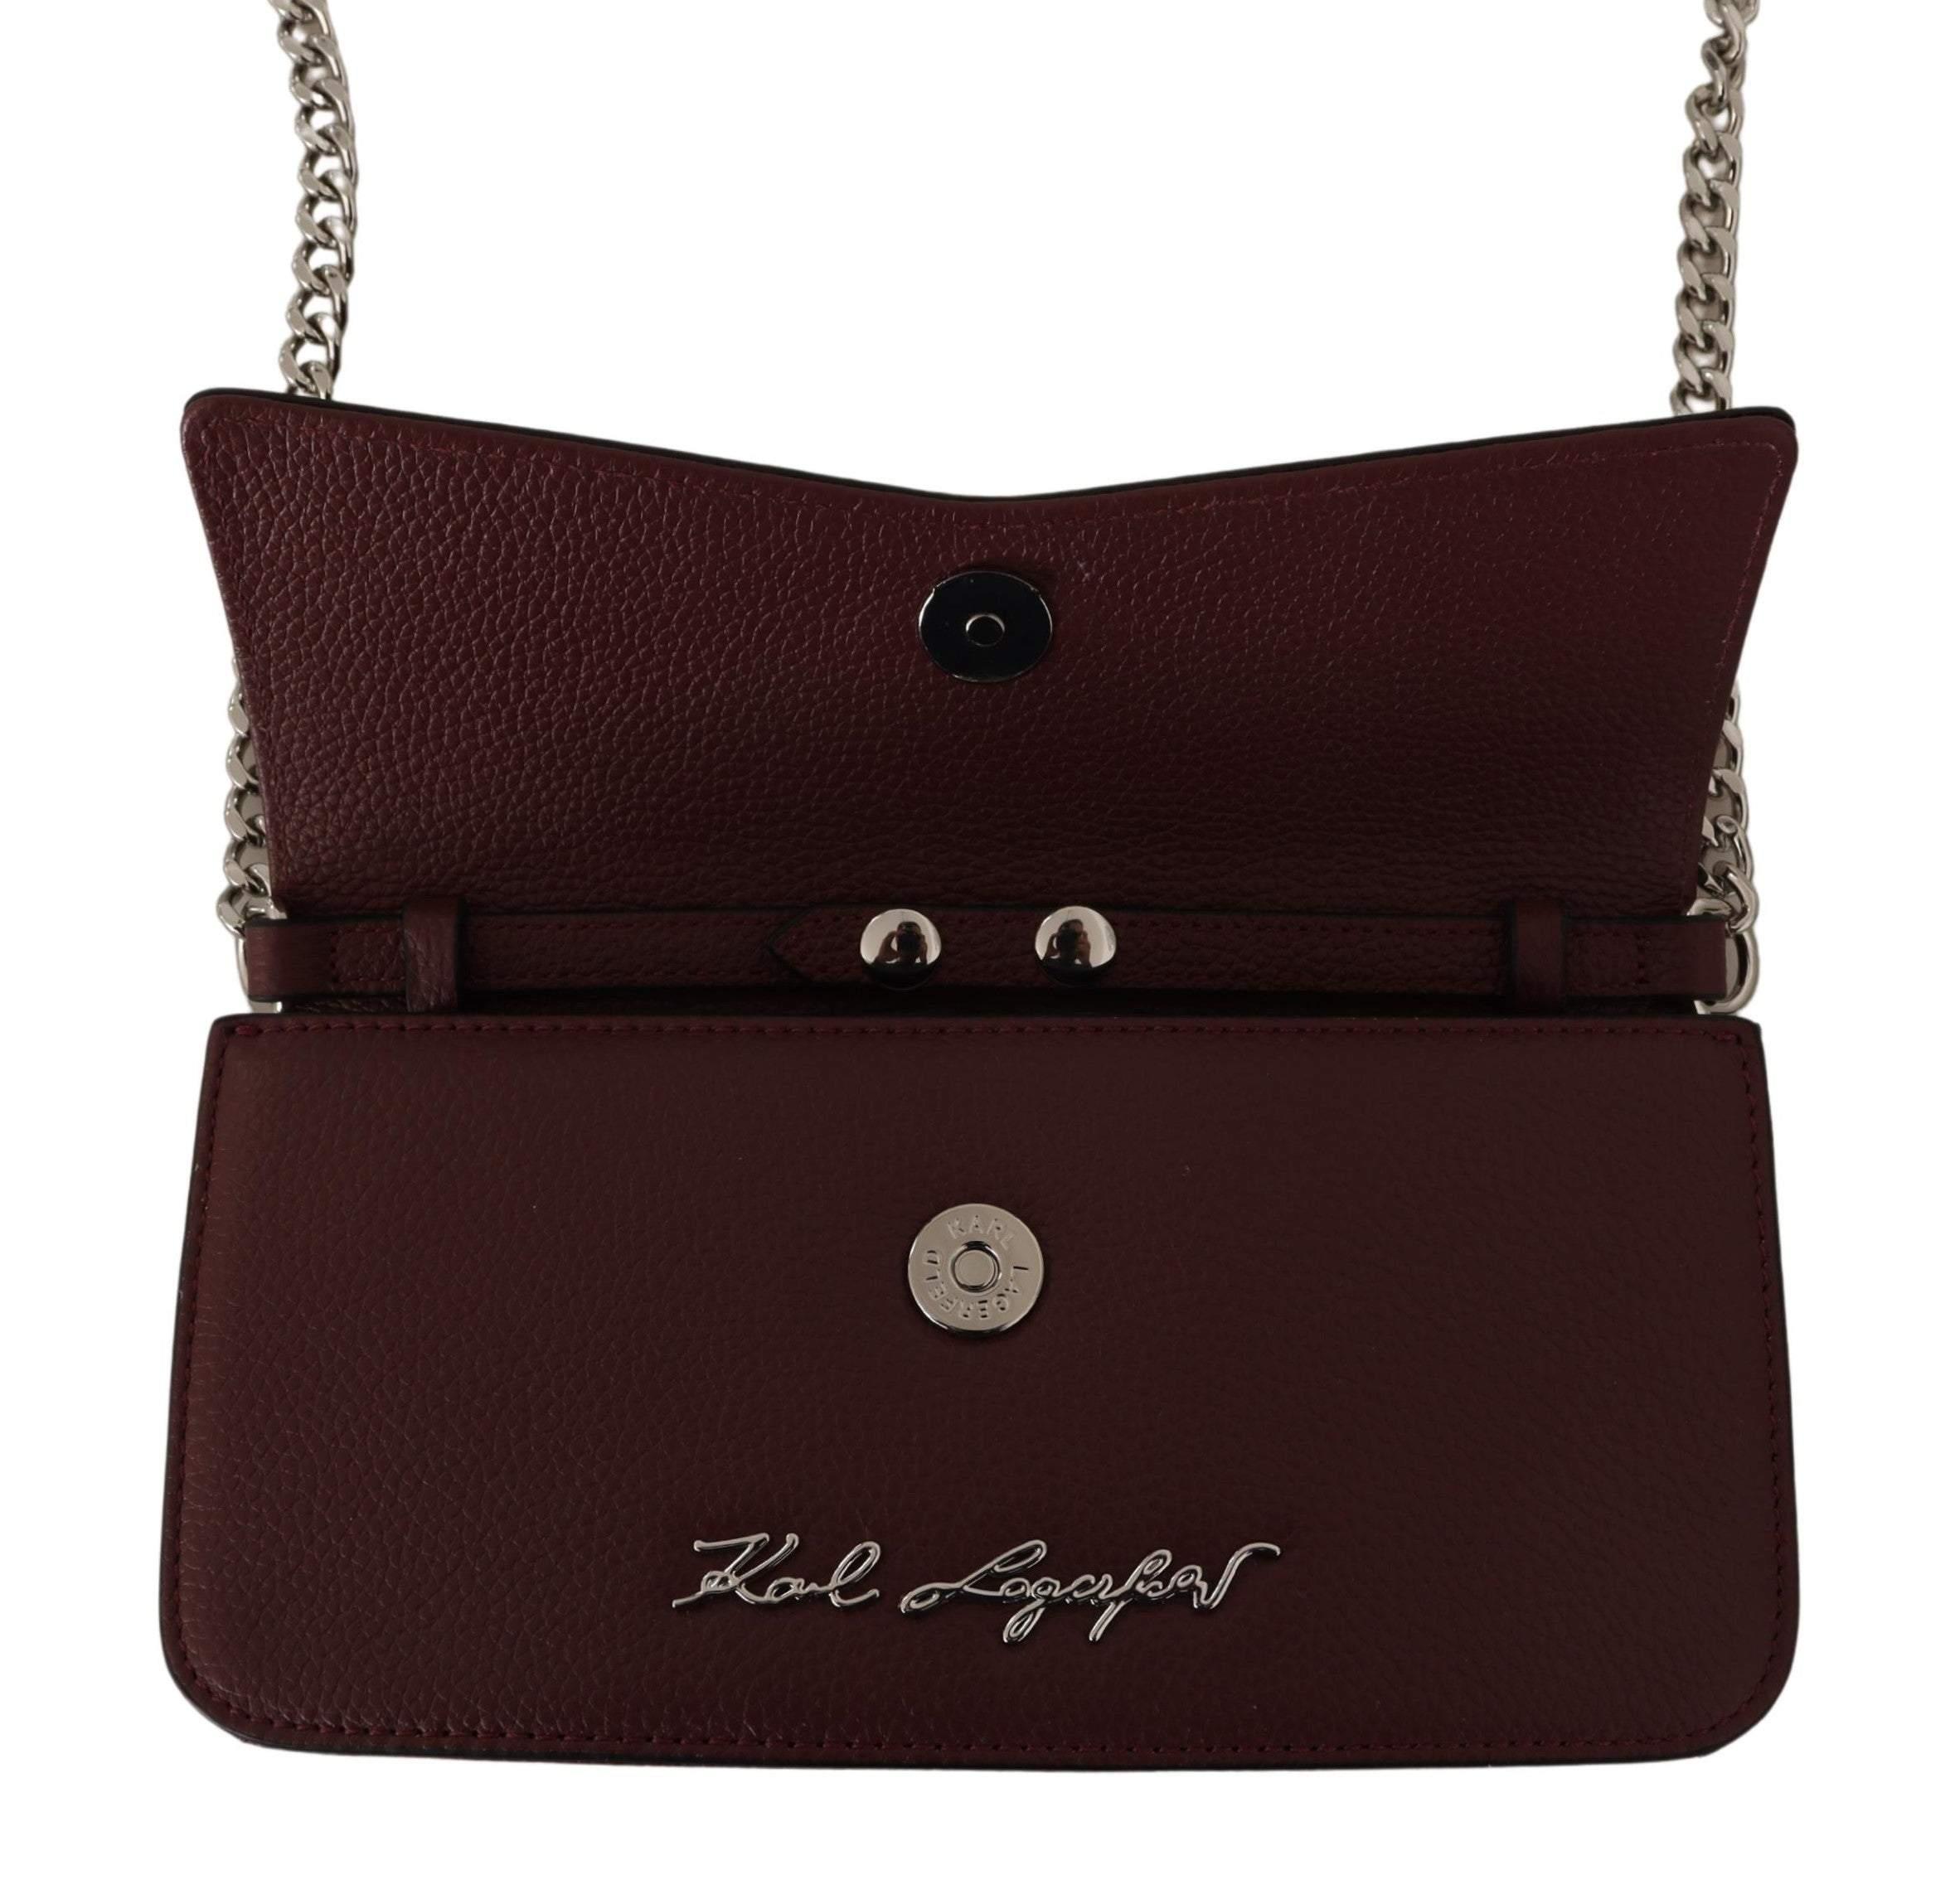 Karl Lagerfeld Wine Leather Evening Clutch Bag in Brown | Lyst